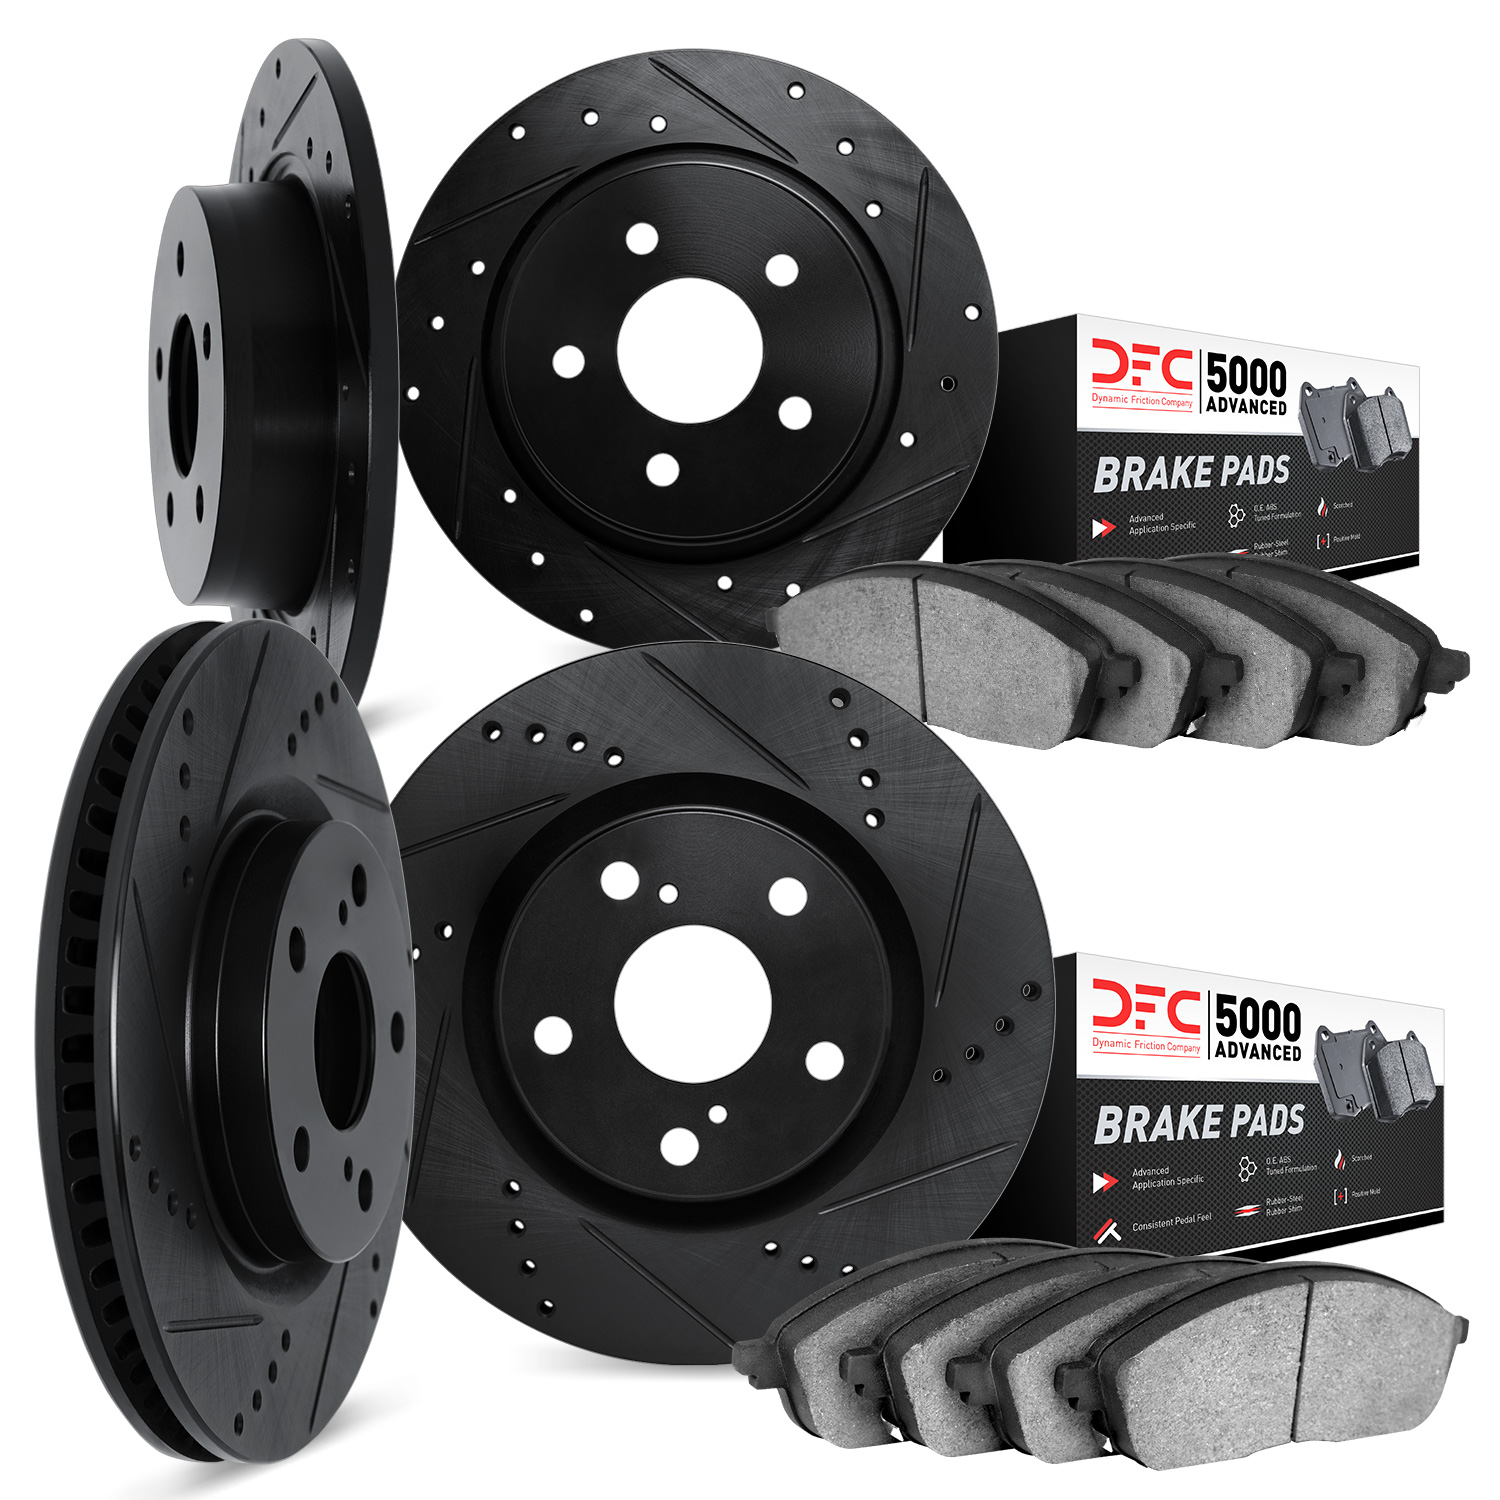 8504-45017 Drilled/Slotted Brake Rotors w/5000 Advanced Brake Pads Kit [Black], 1994-1995 GM, Position: Front and Rear